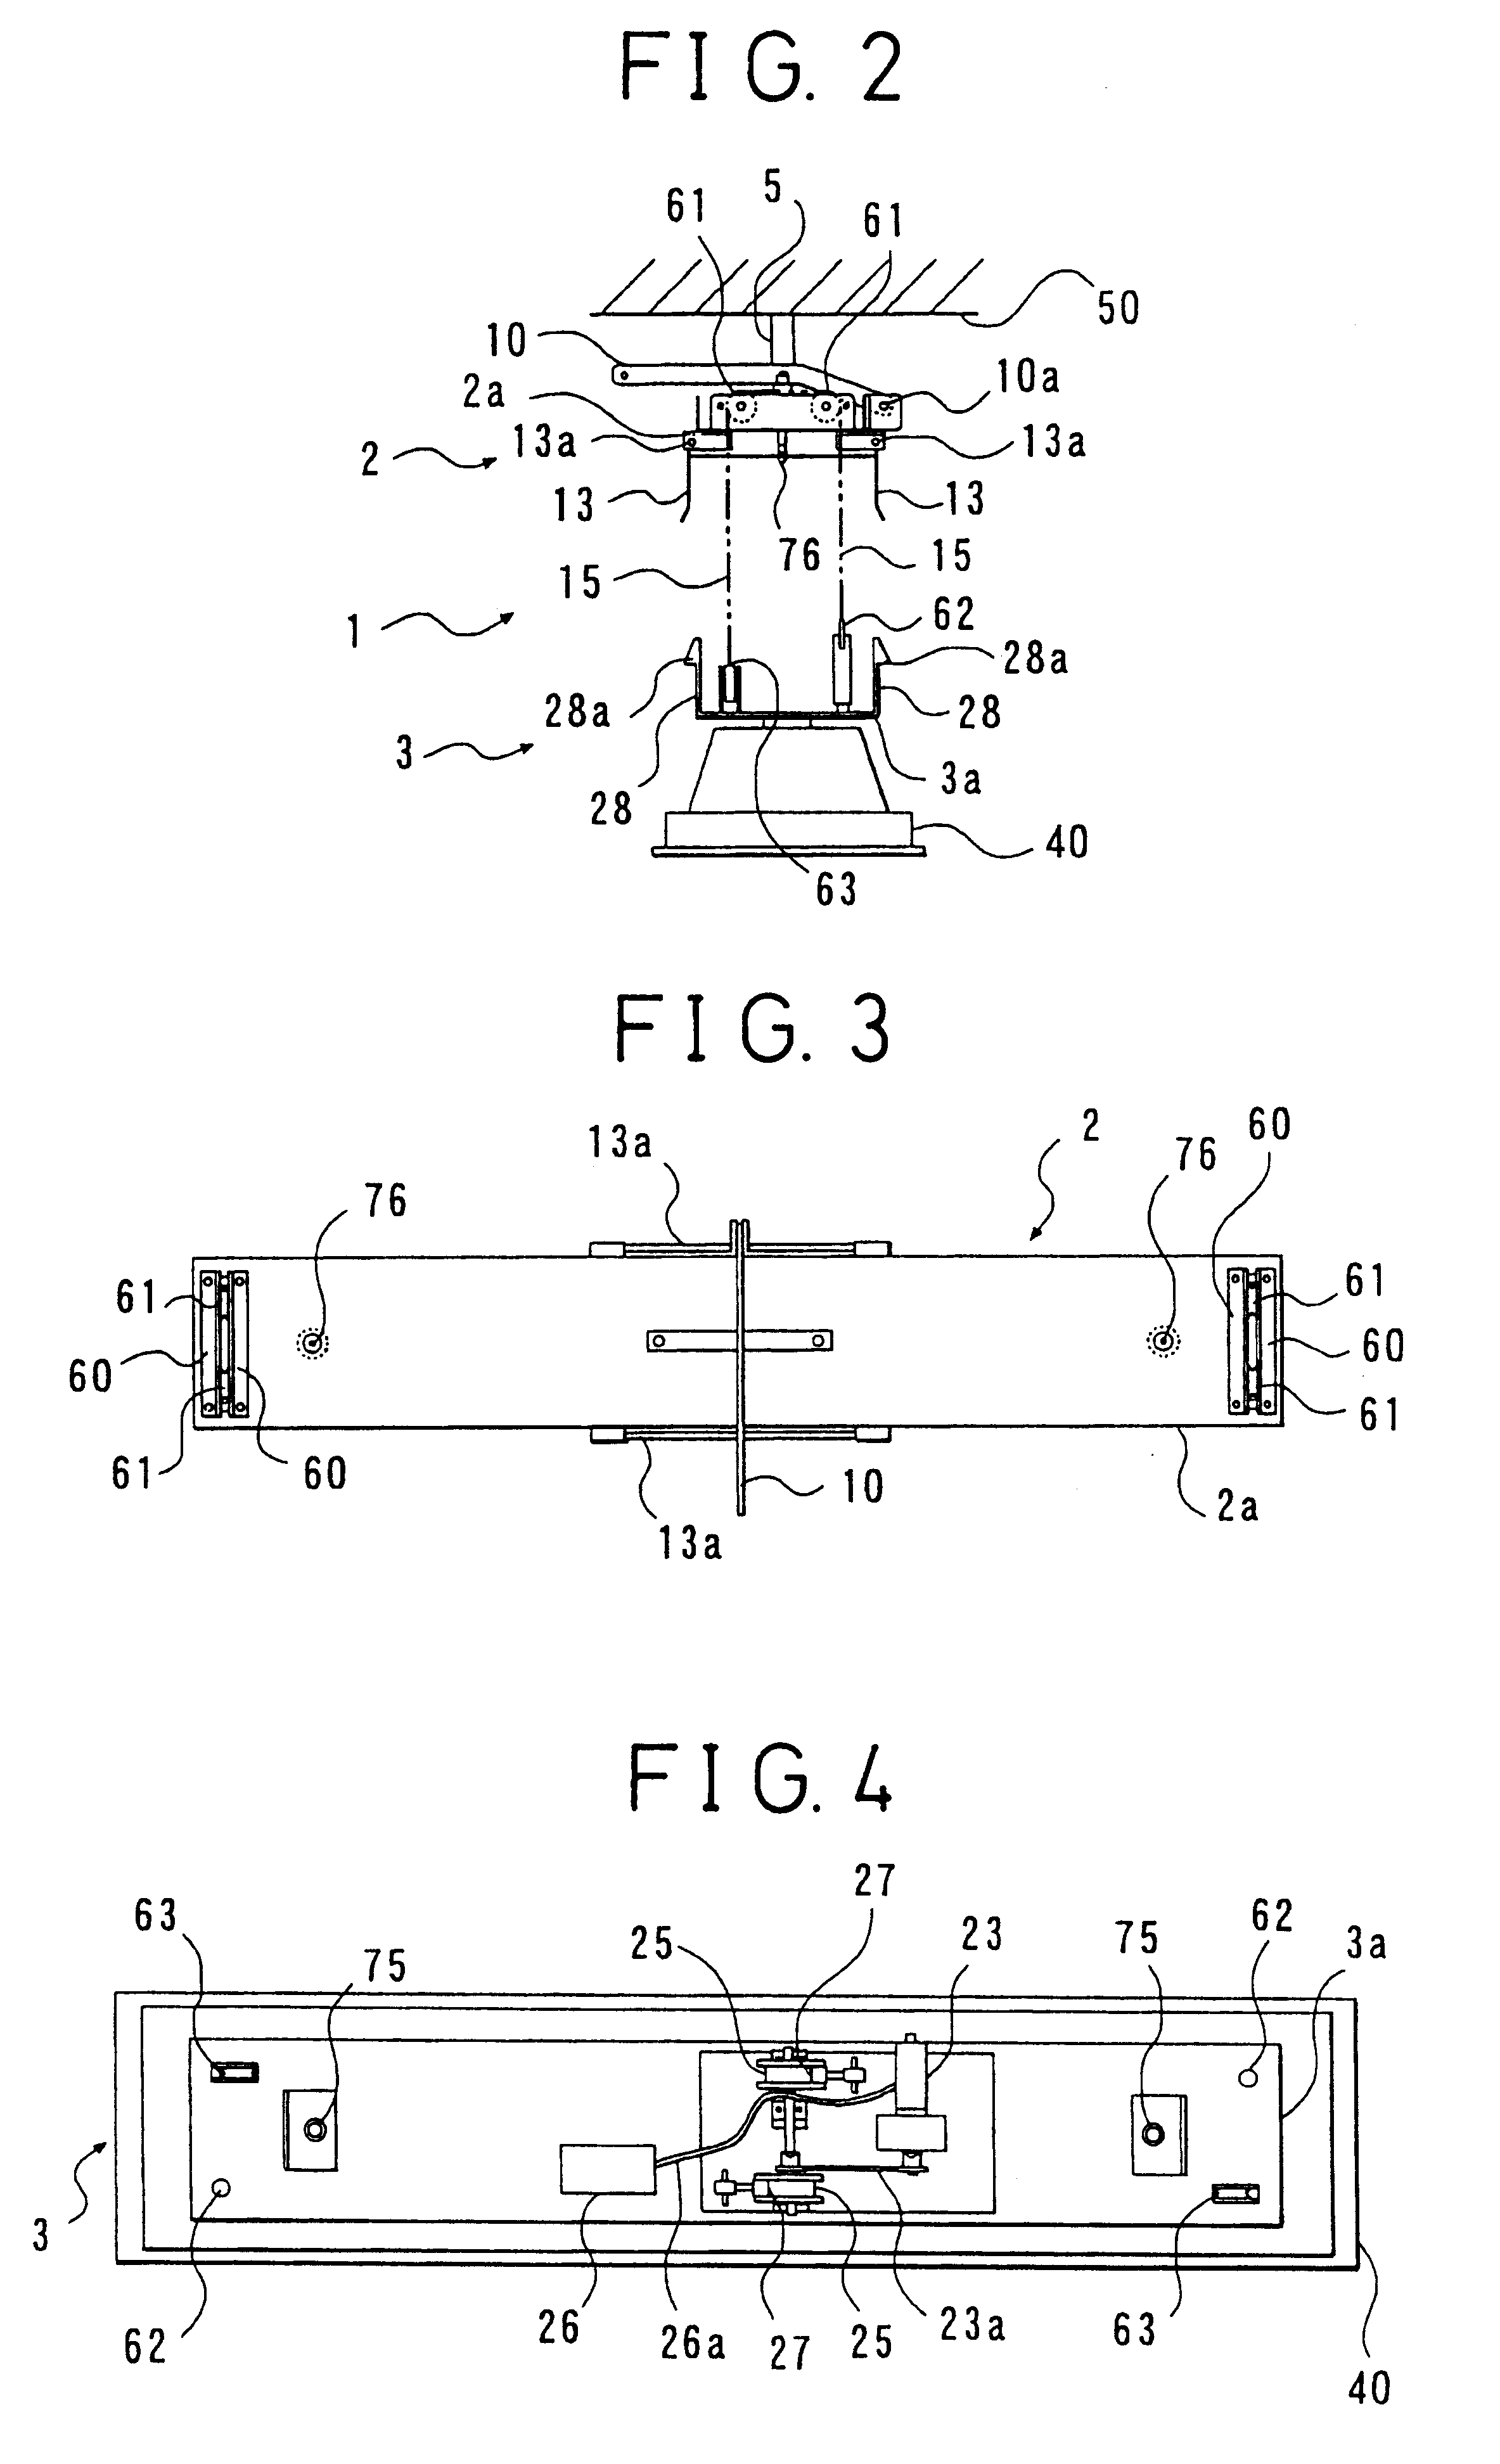 Self-winding-type fixture-lifting/lowering device